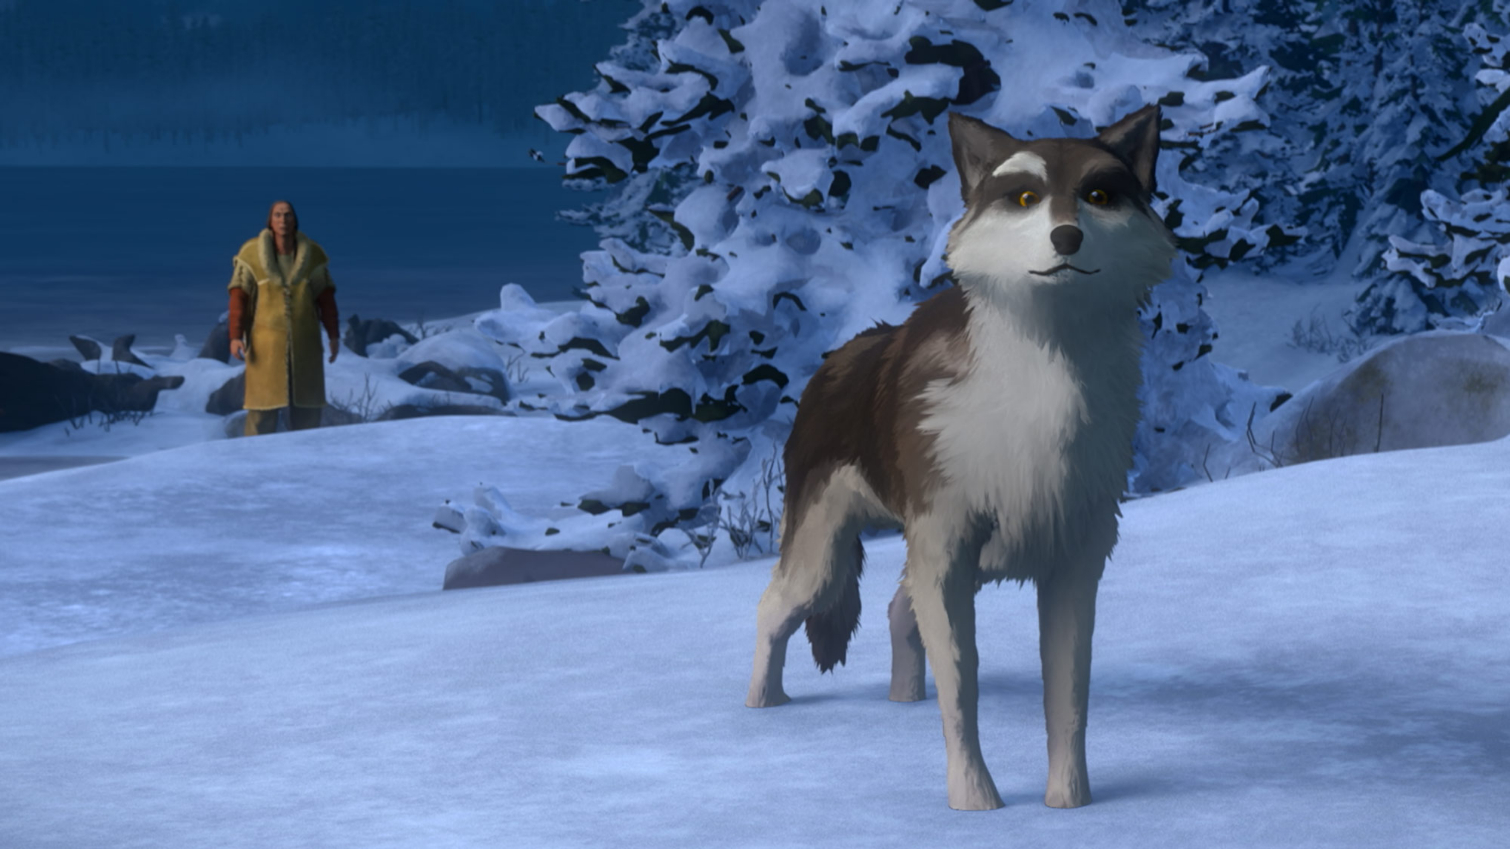 Best family movies on Netflix white fang